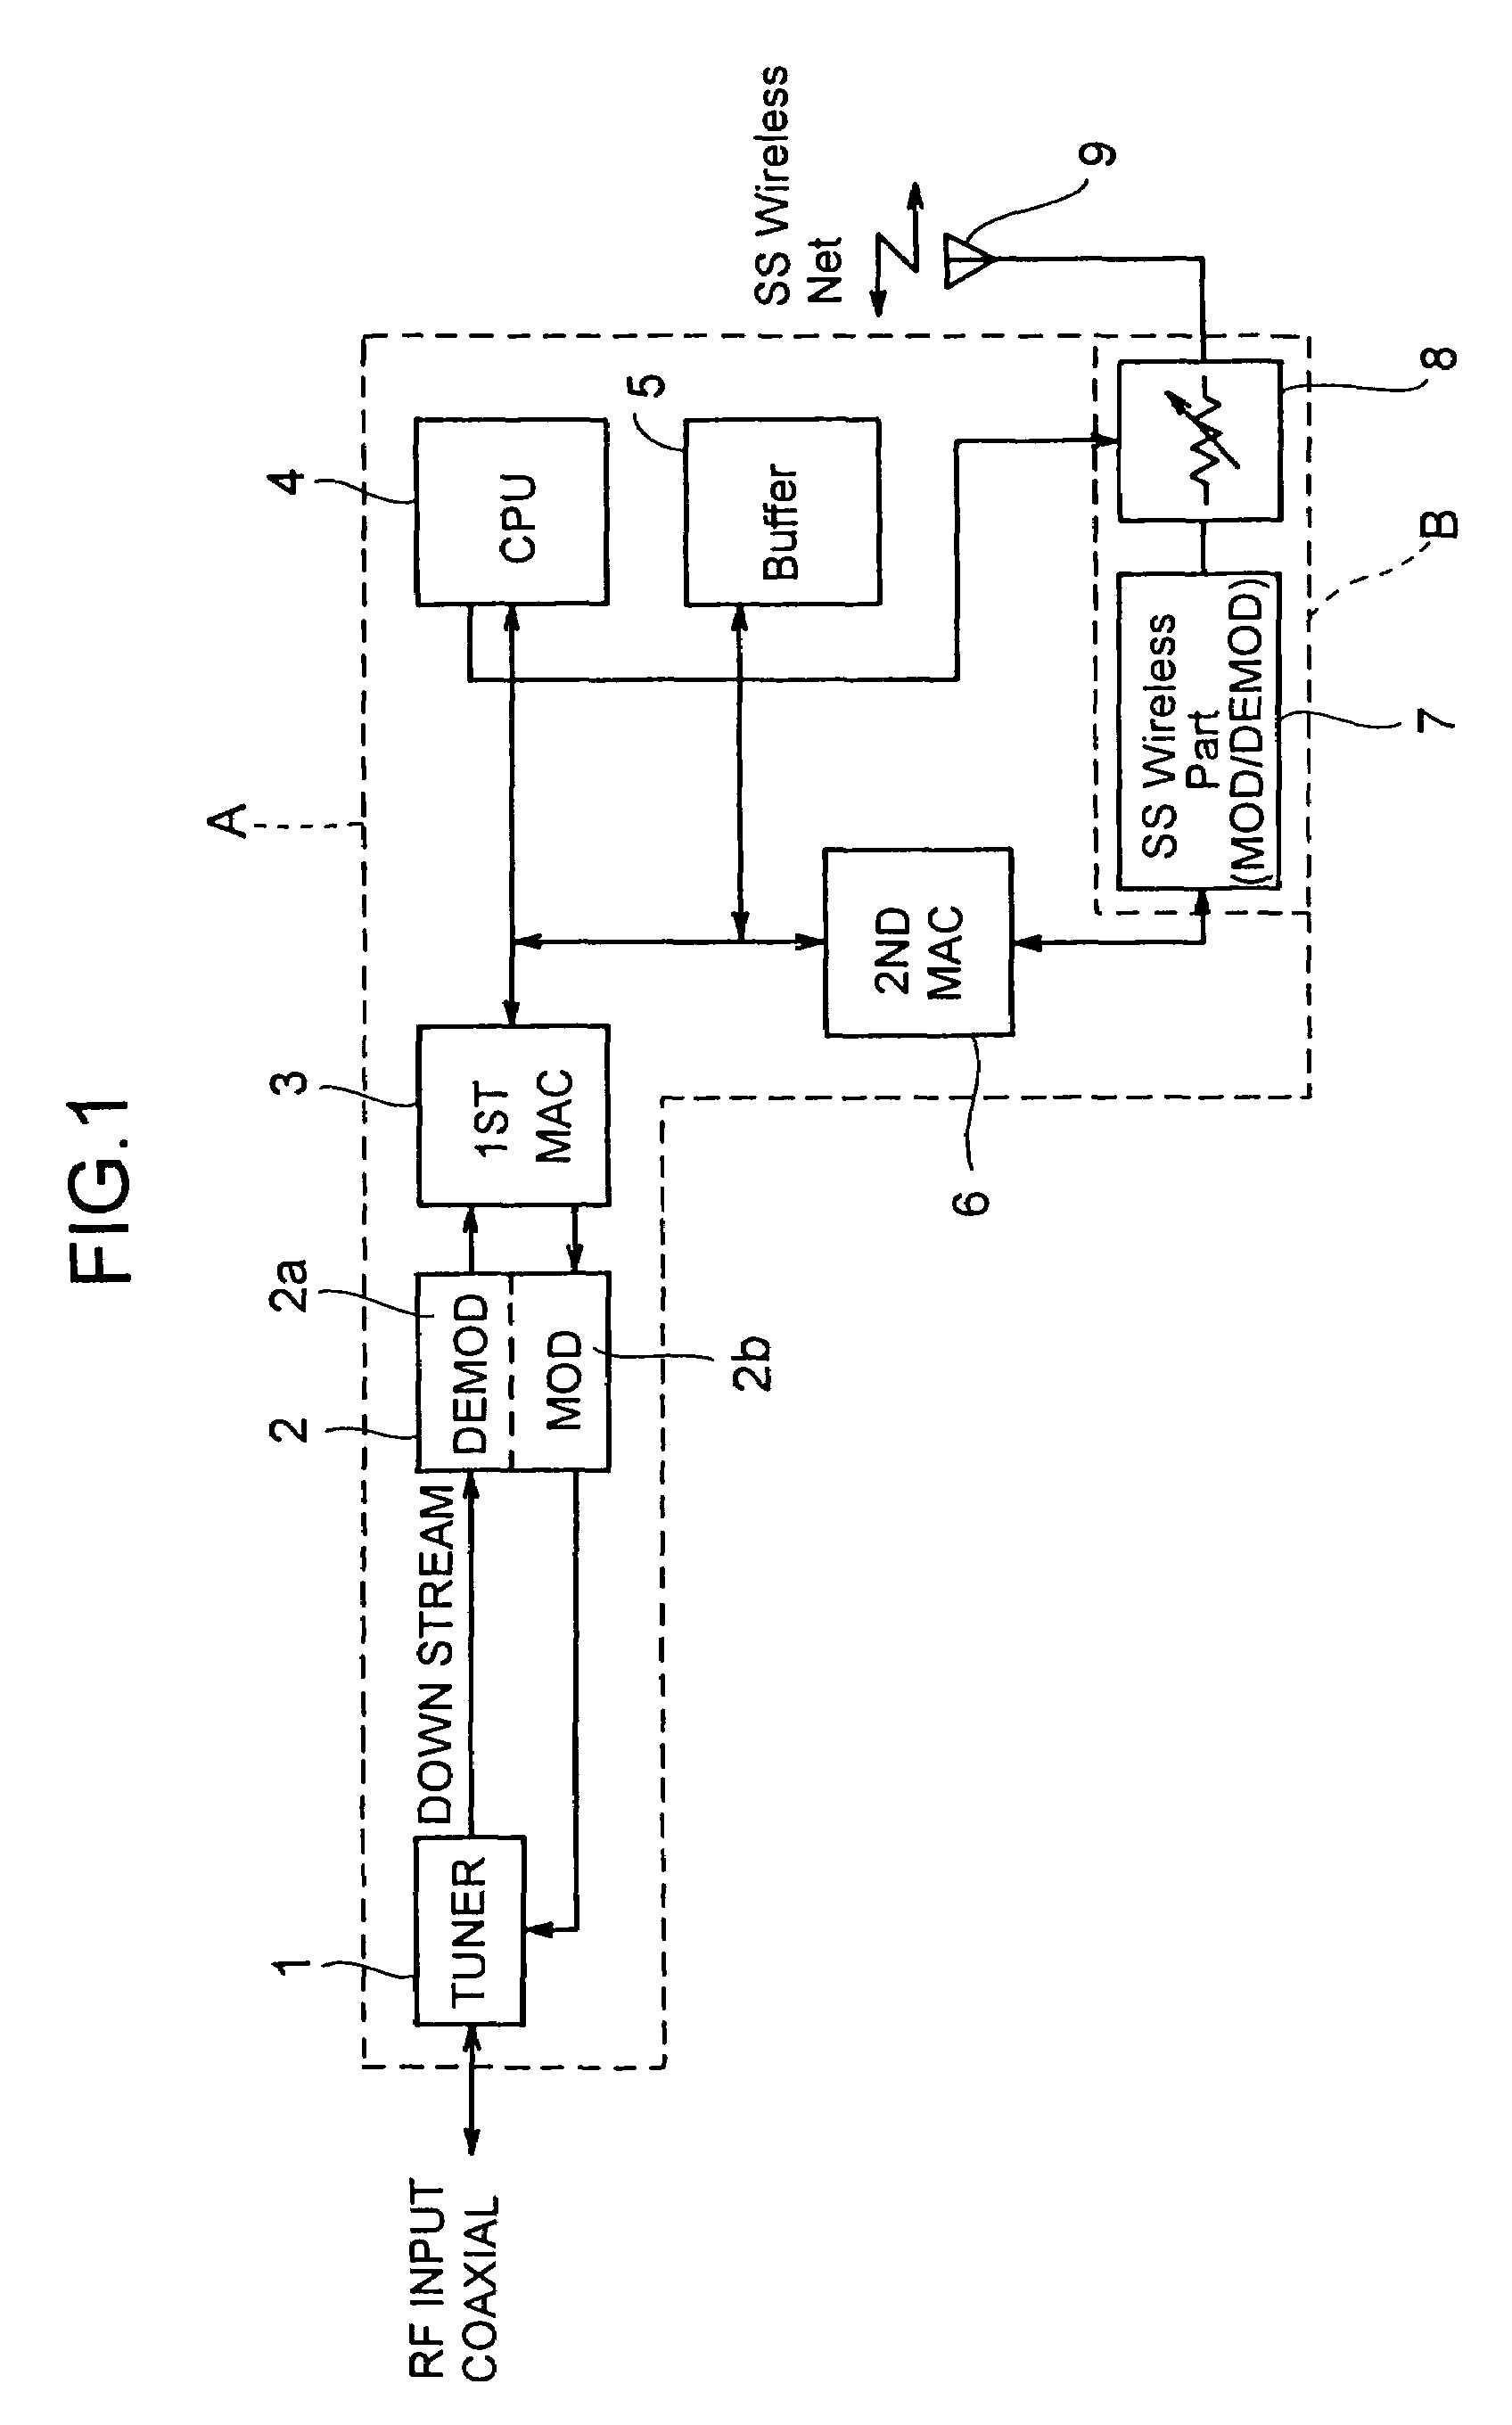 Cable modem having a wireless communication function